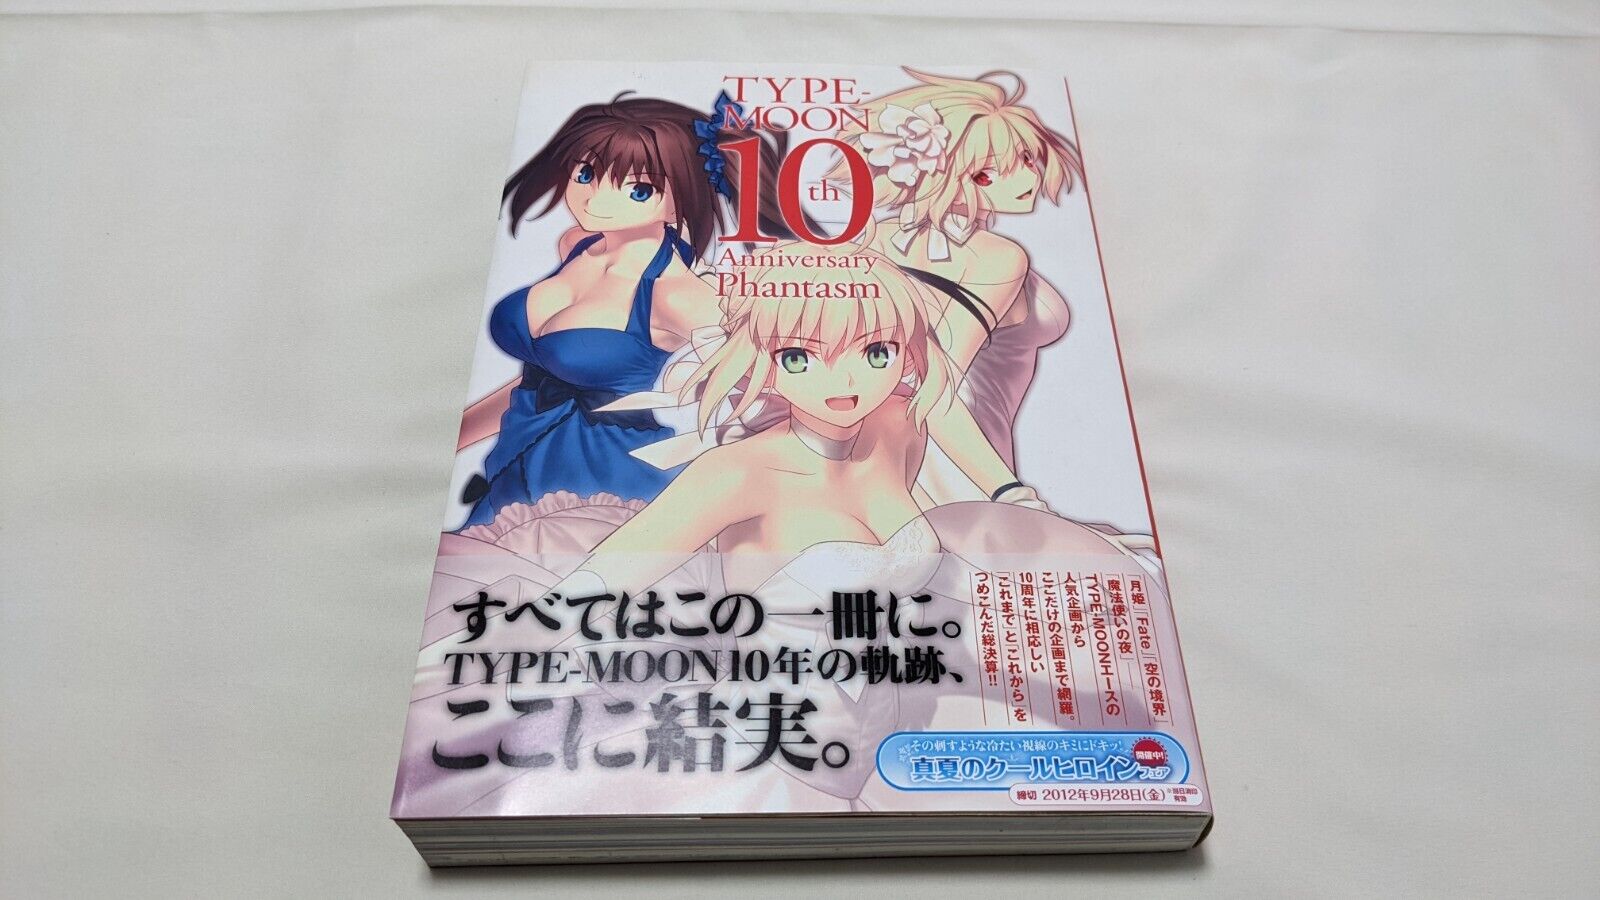 TYPE-MOON 10th Anniversary Phantasm Tsukihime,Fate/stay night,Excellent Japan